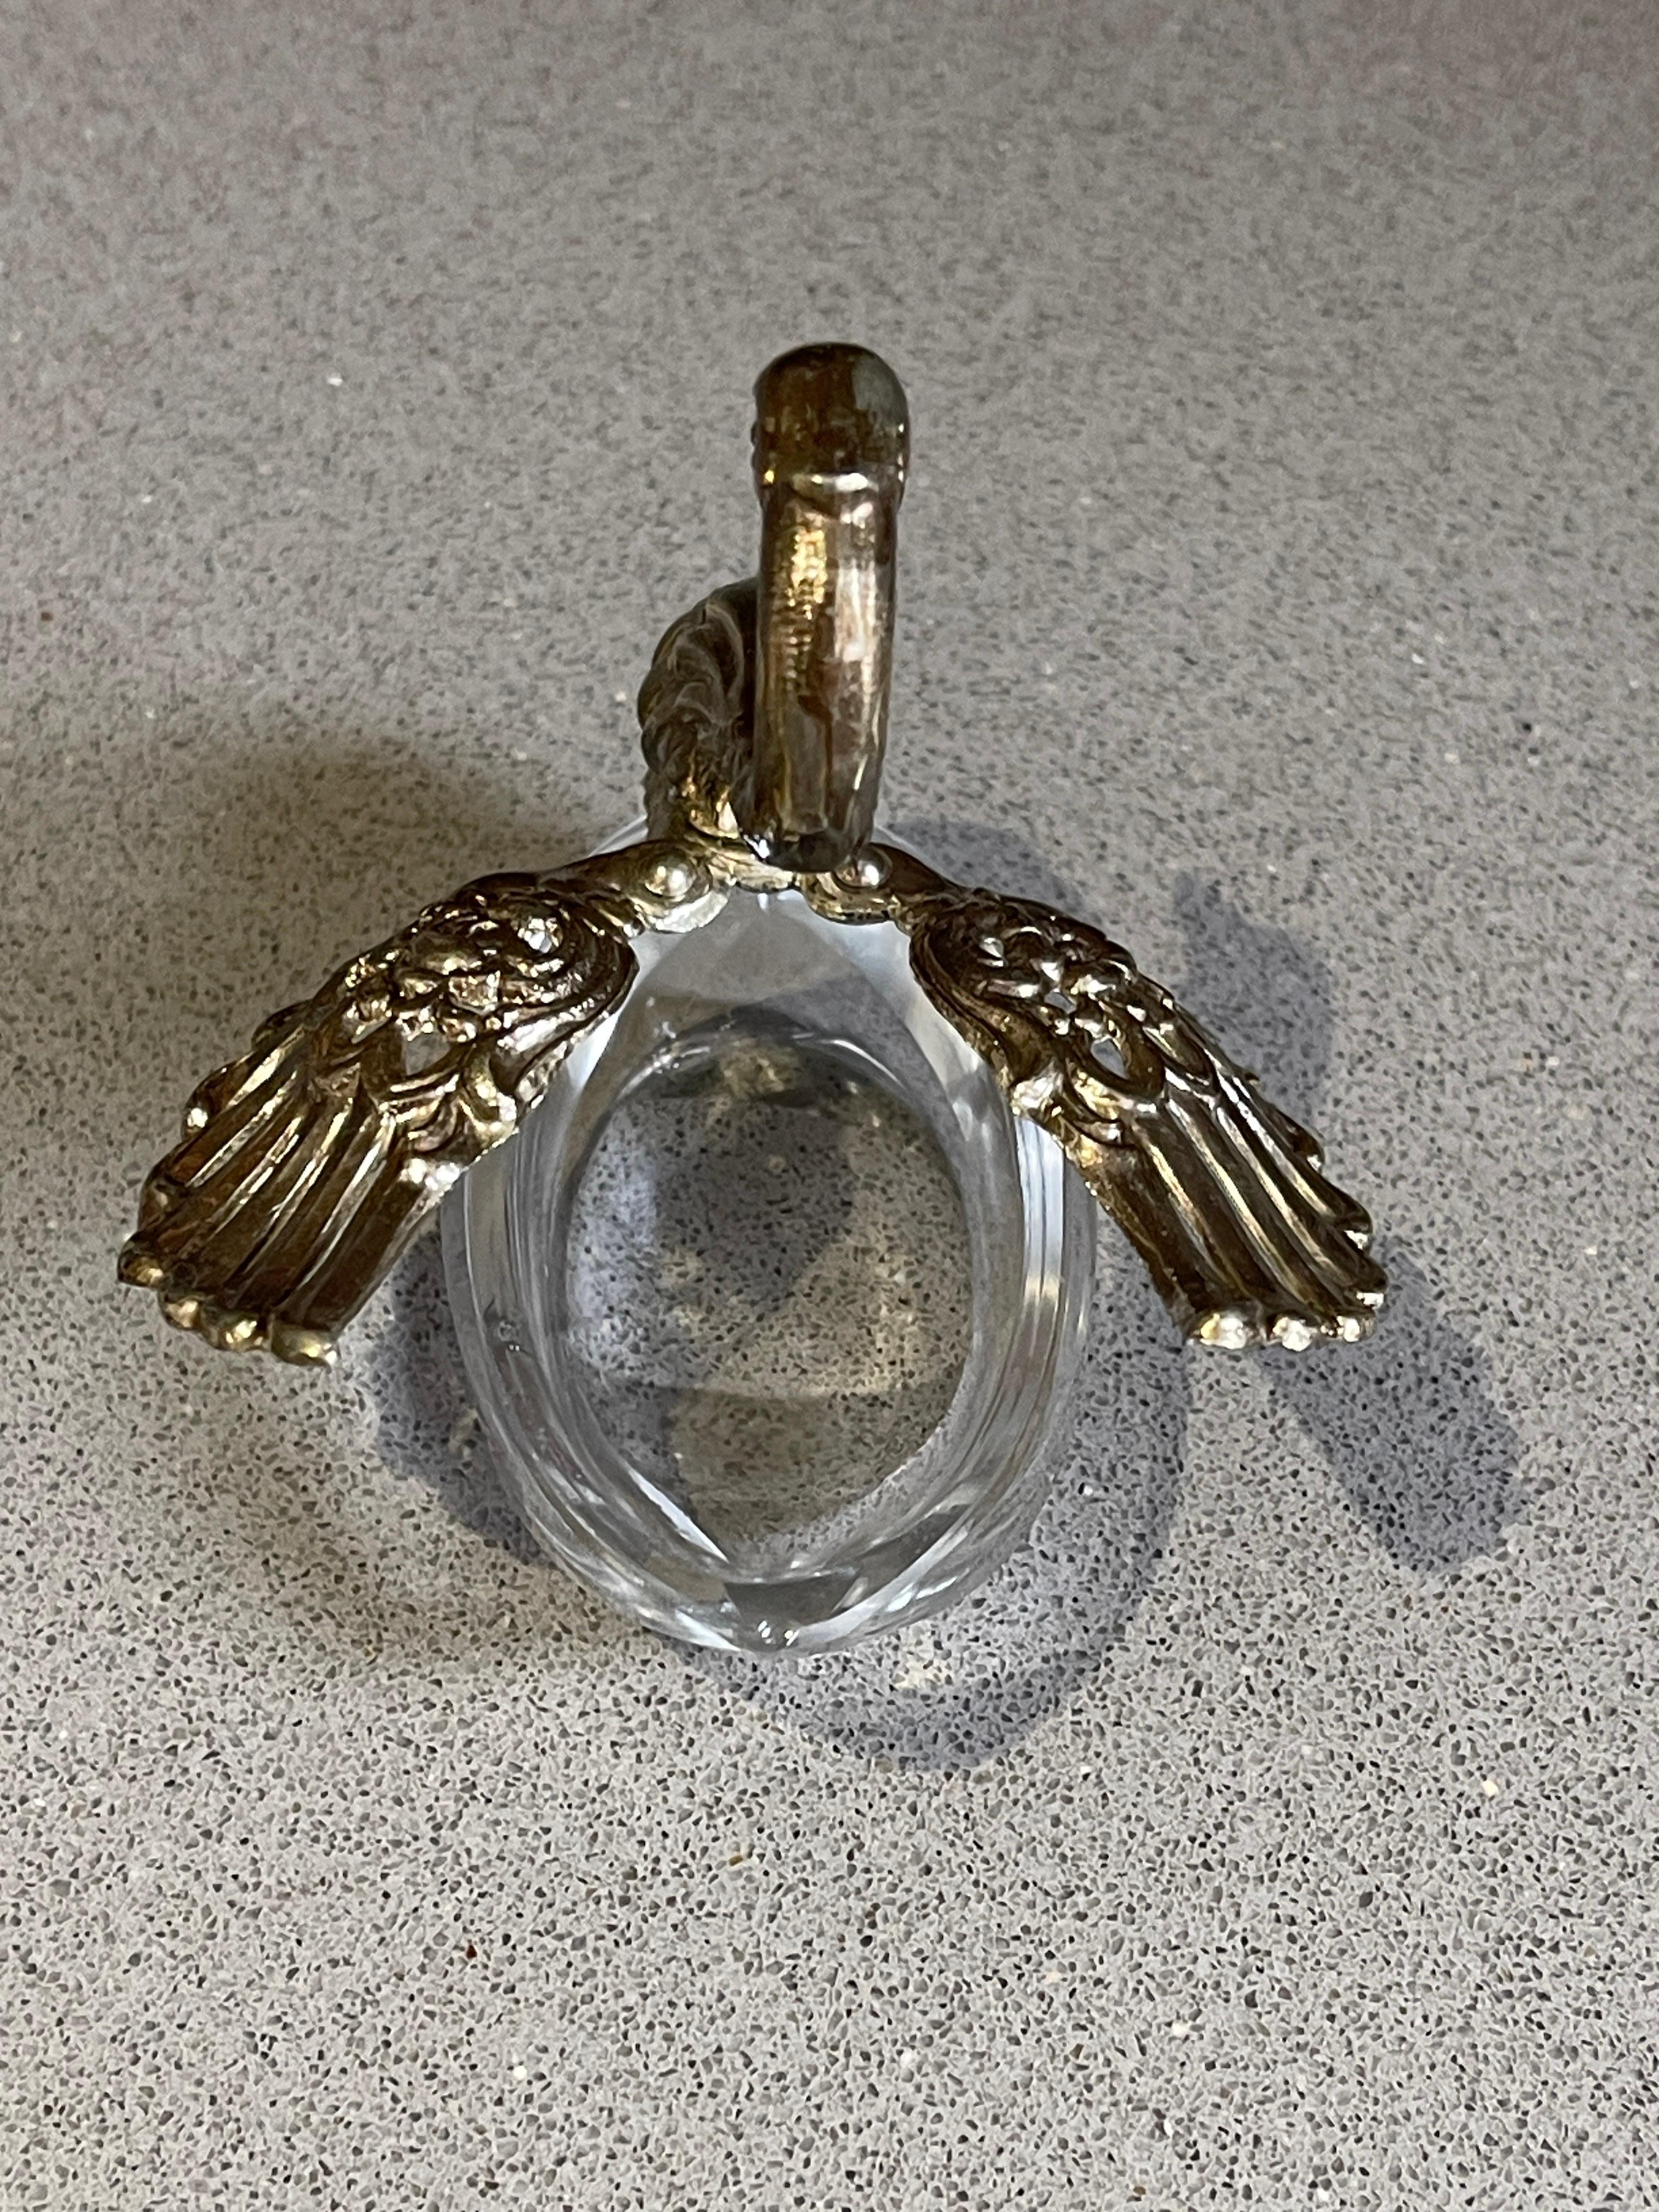 Mid-20th Century Silver Salt Shaker, A Pair of Antique Salt Shaker Crystal Swann Moving Wings